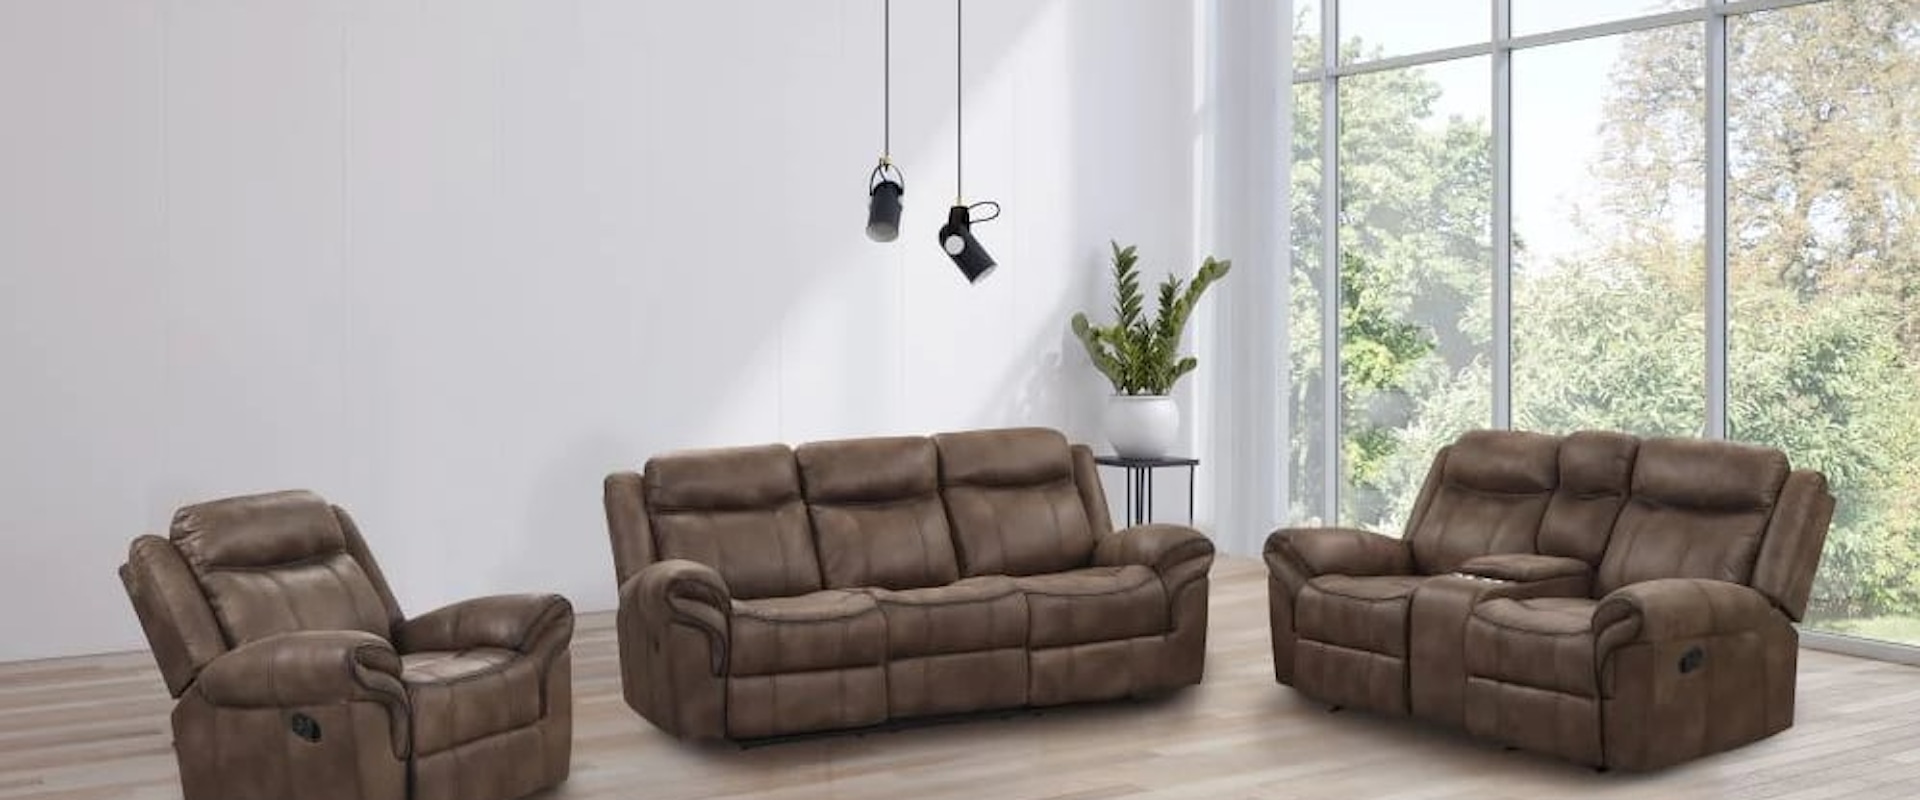 MARYVILLE BROWN SOFA AND LOVESEAT |